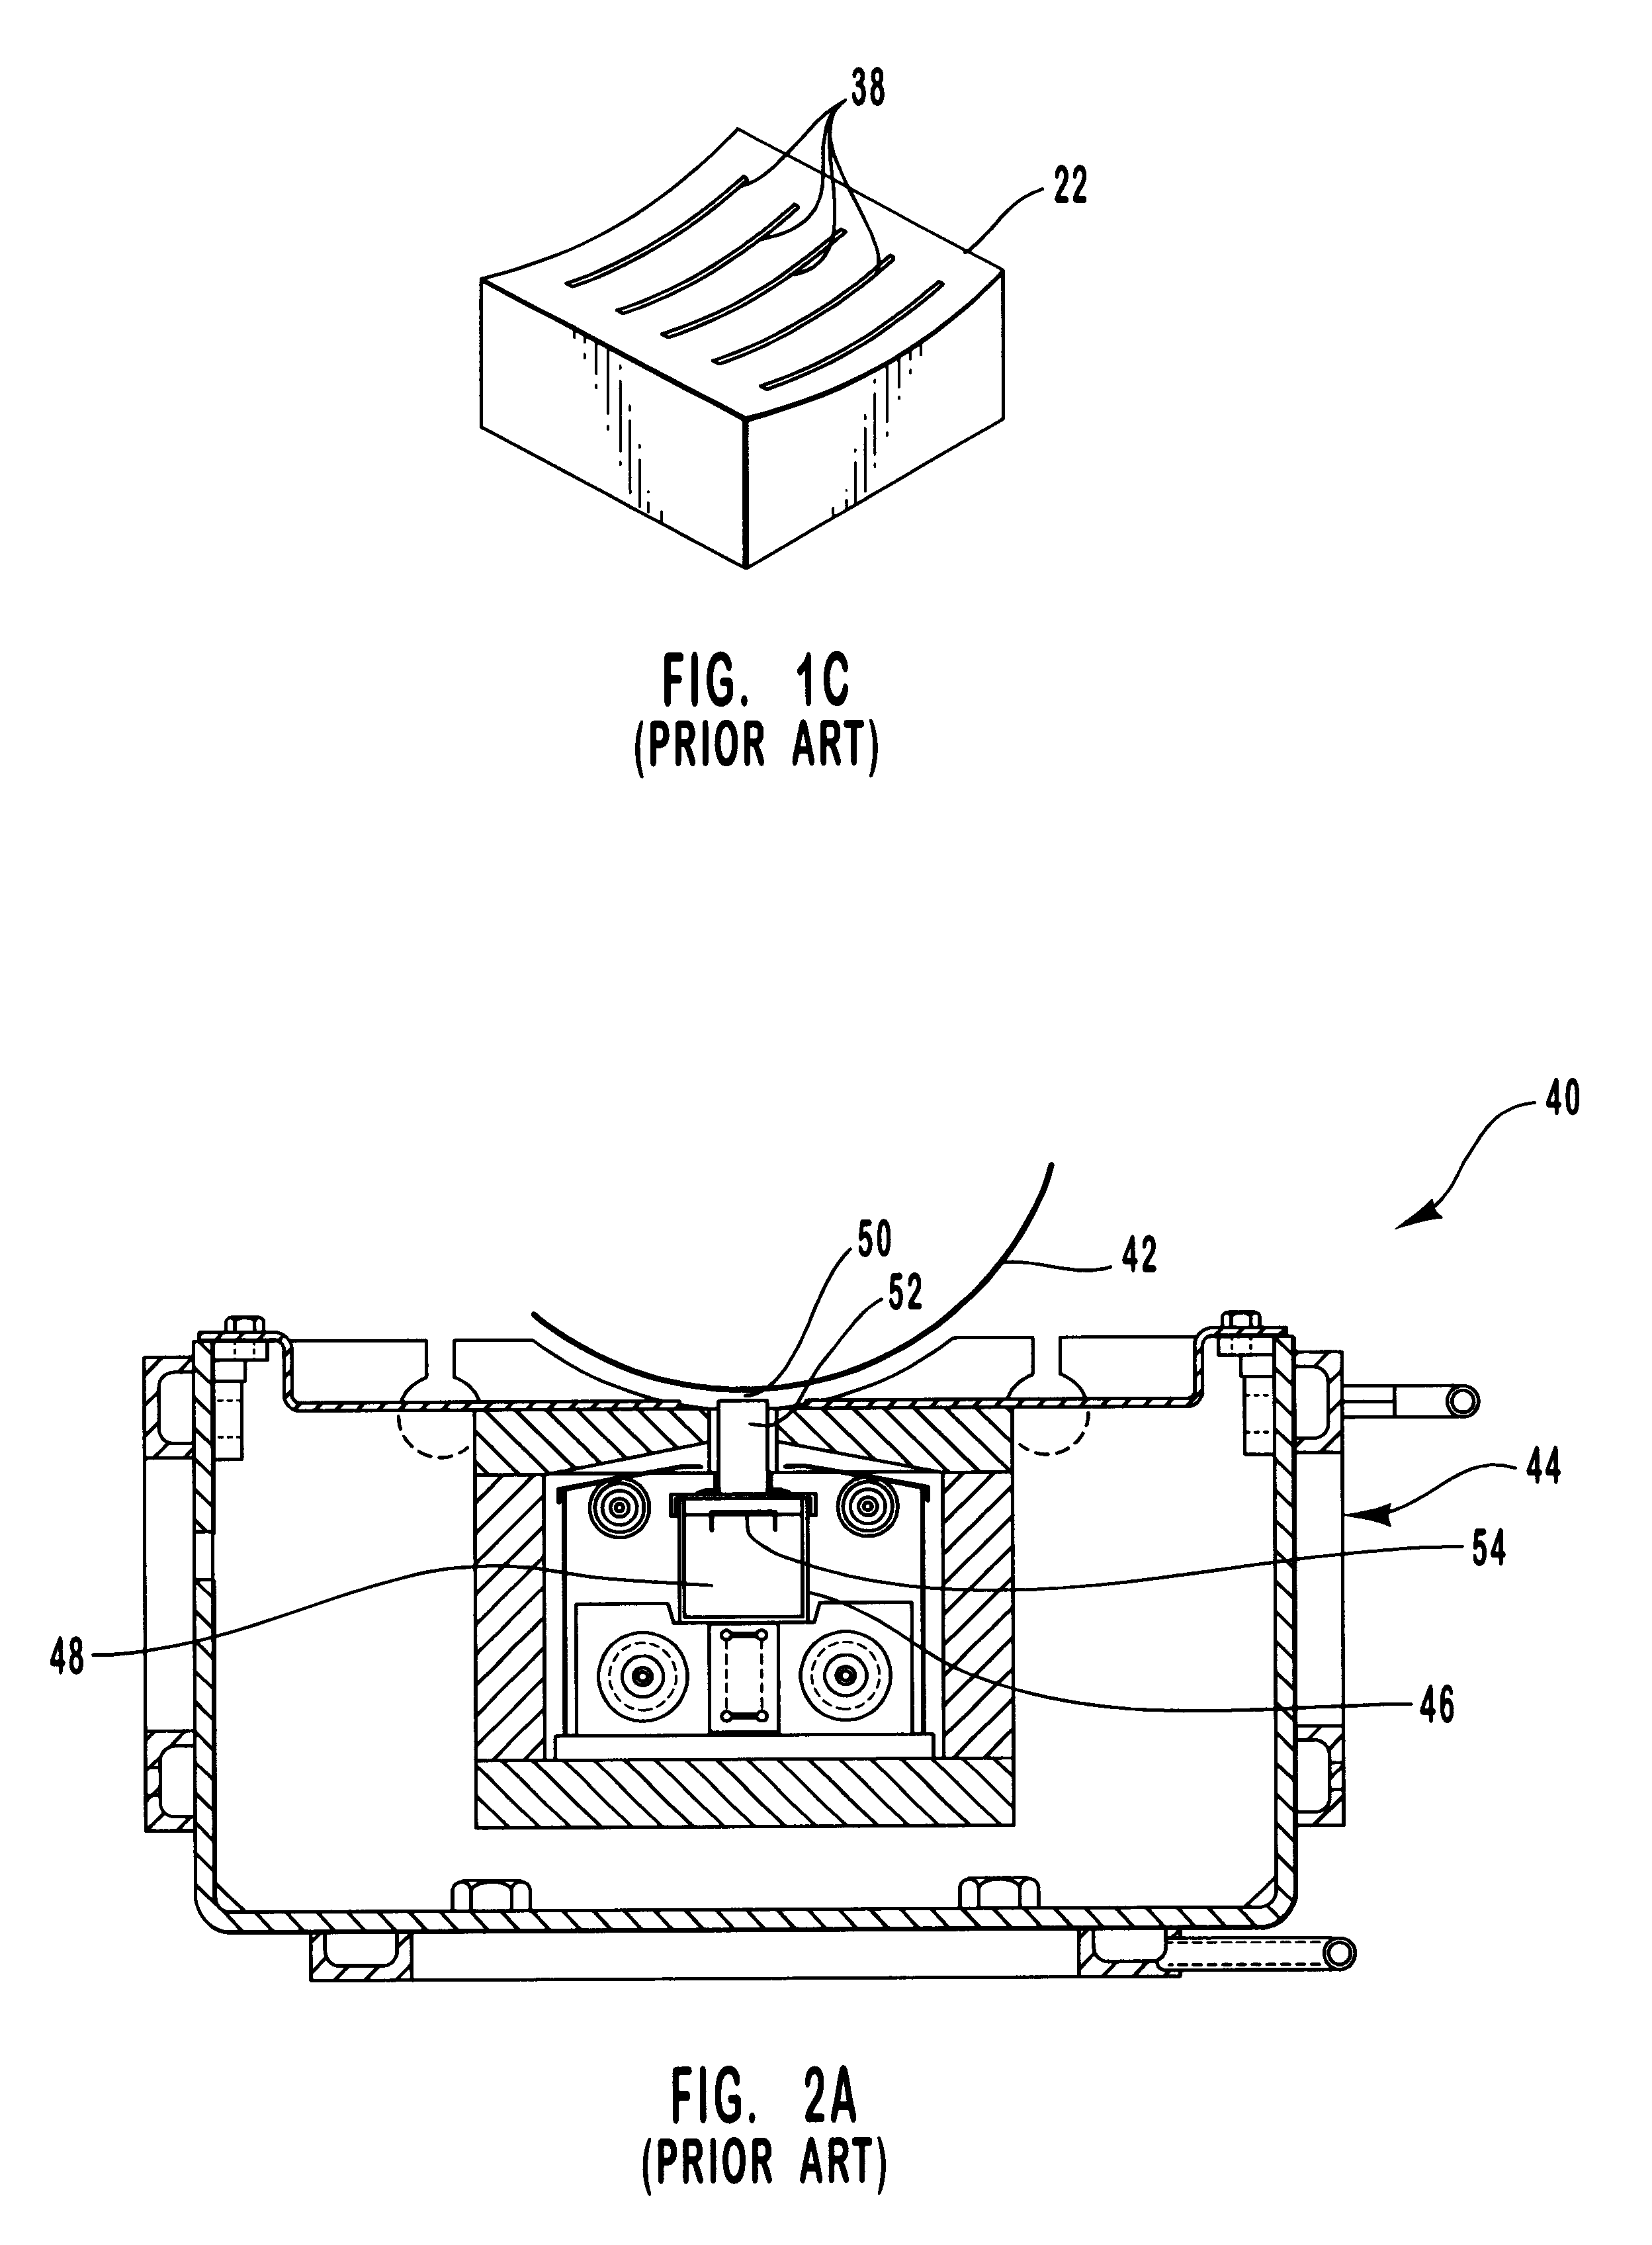 Linear aperture deposition apparatus and coating process